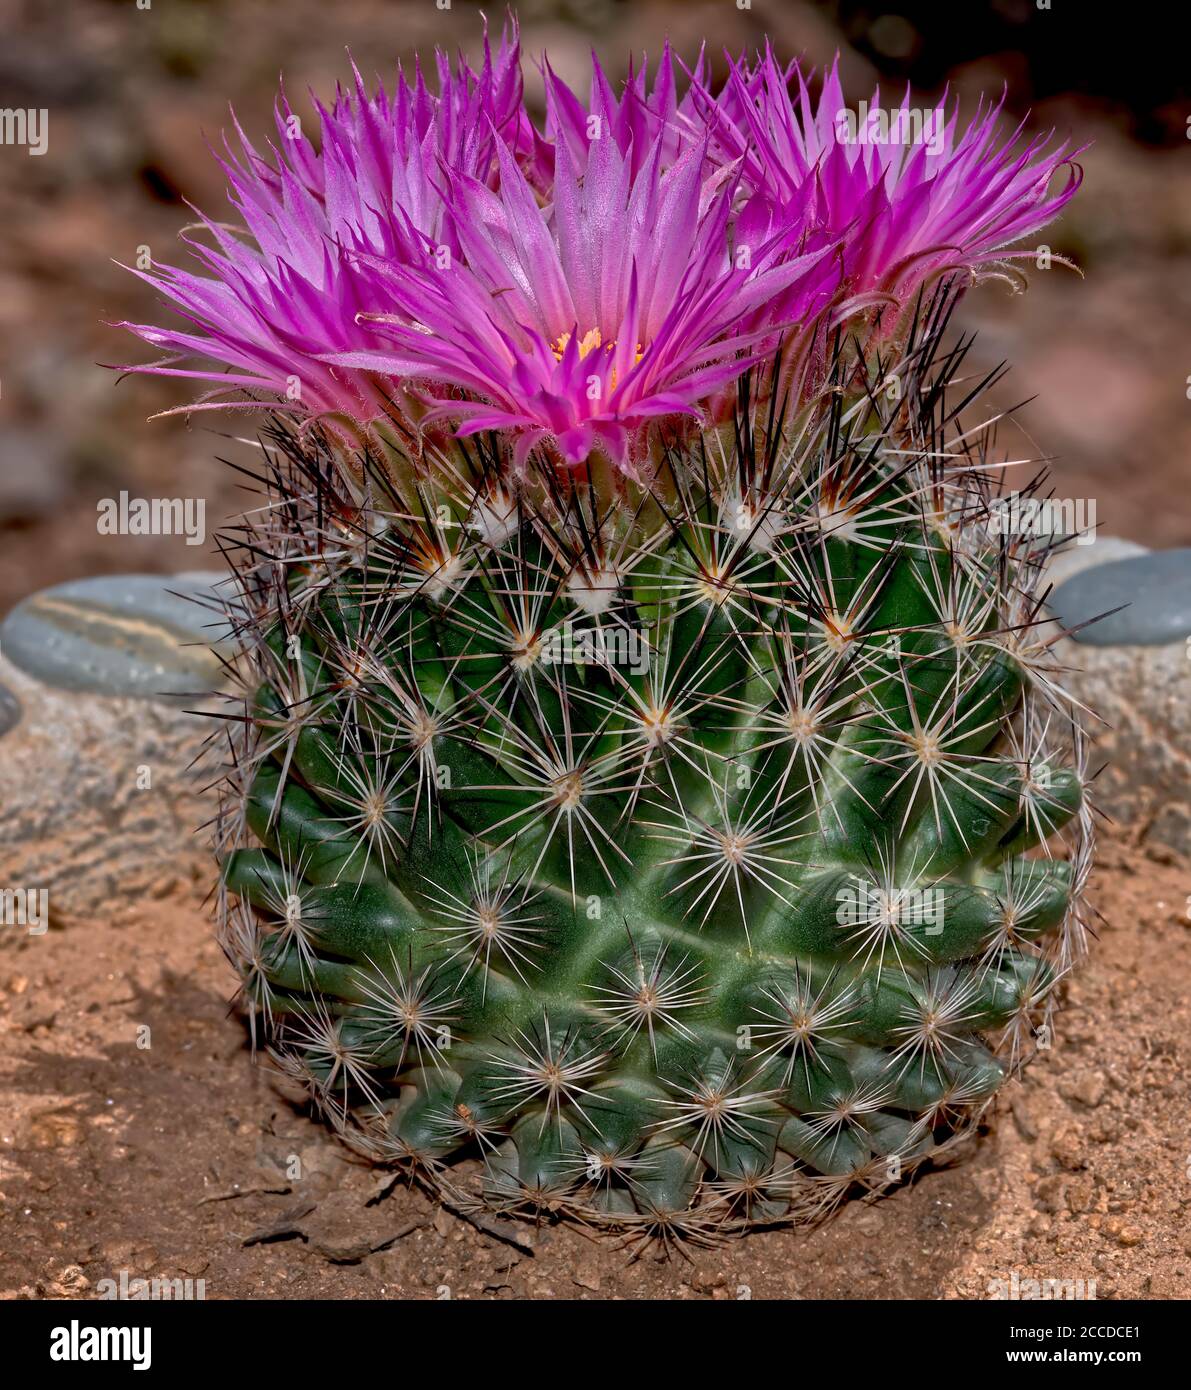 Flower of the Escobaria Vivipara cactus, also known as the Pin Cushion Cactus. This cactus ranges from Mexico to southern Canada. Stock Photo